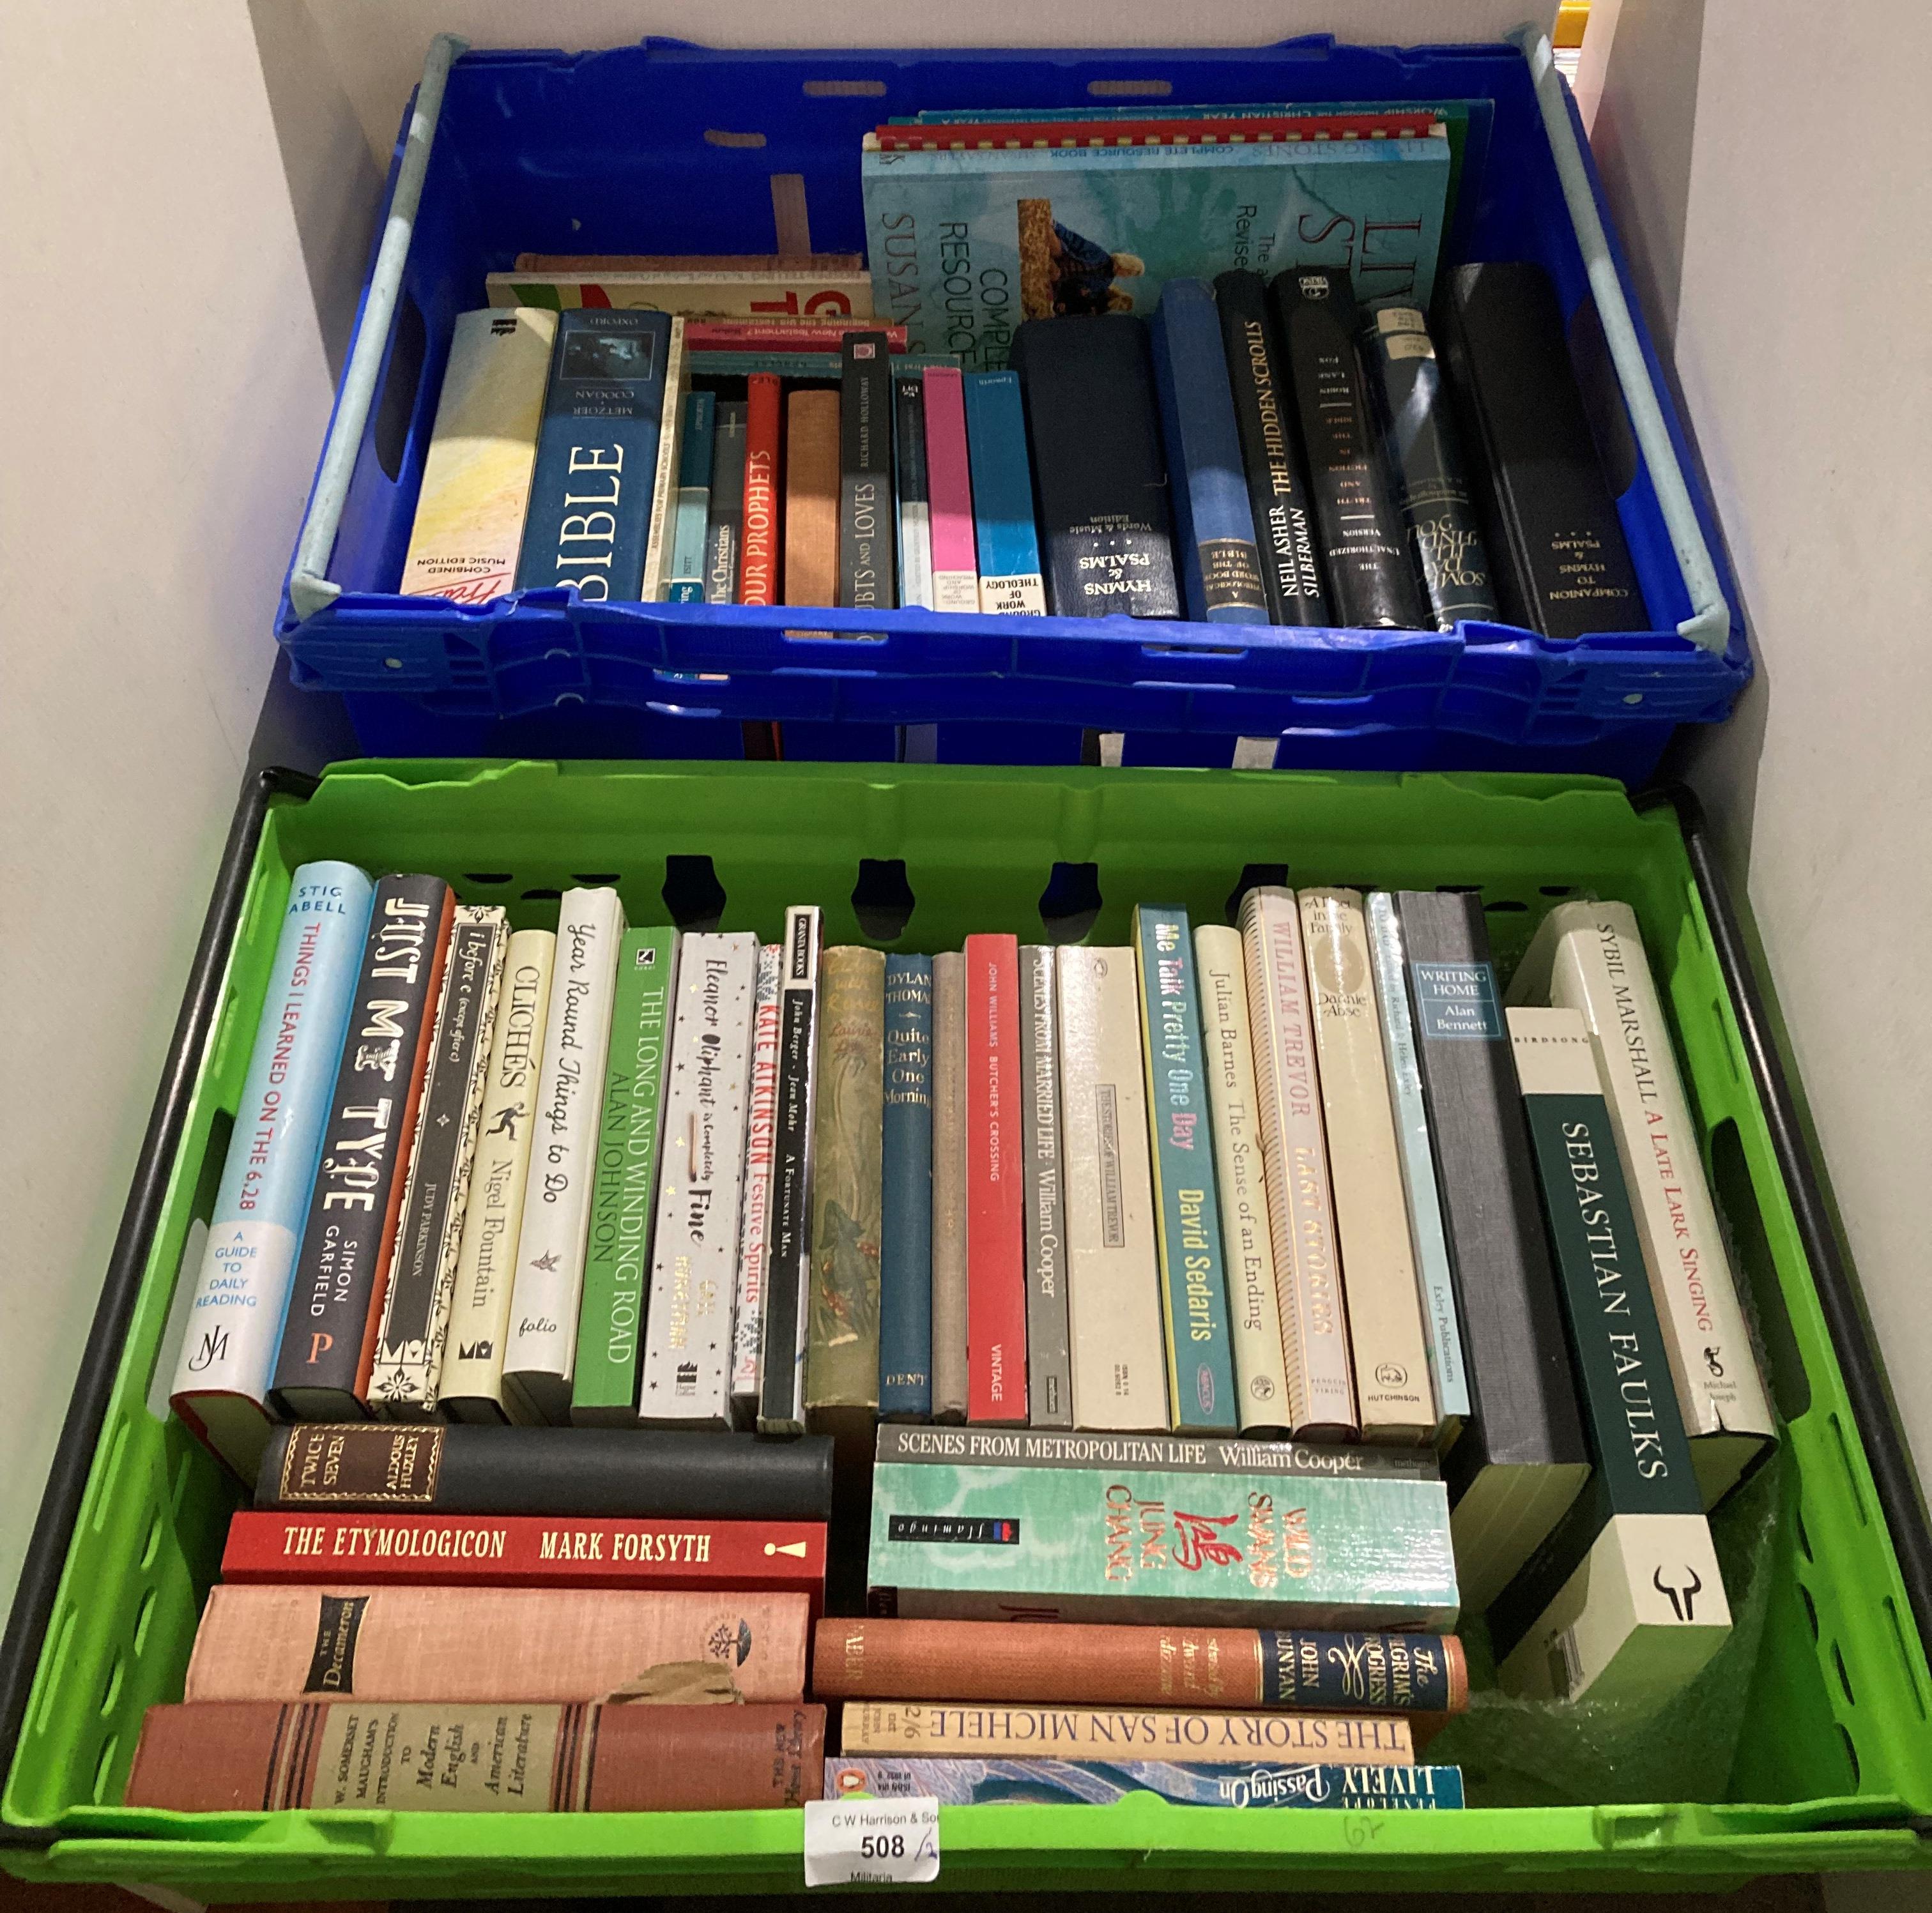 Contents to two crates - approximately sixty assorted hardback and paperback books including 'The